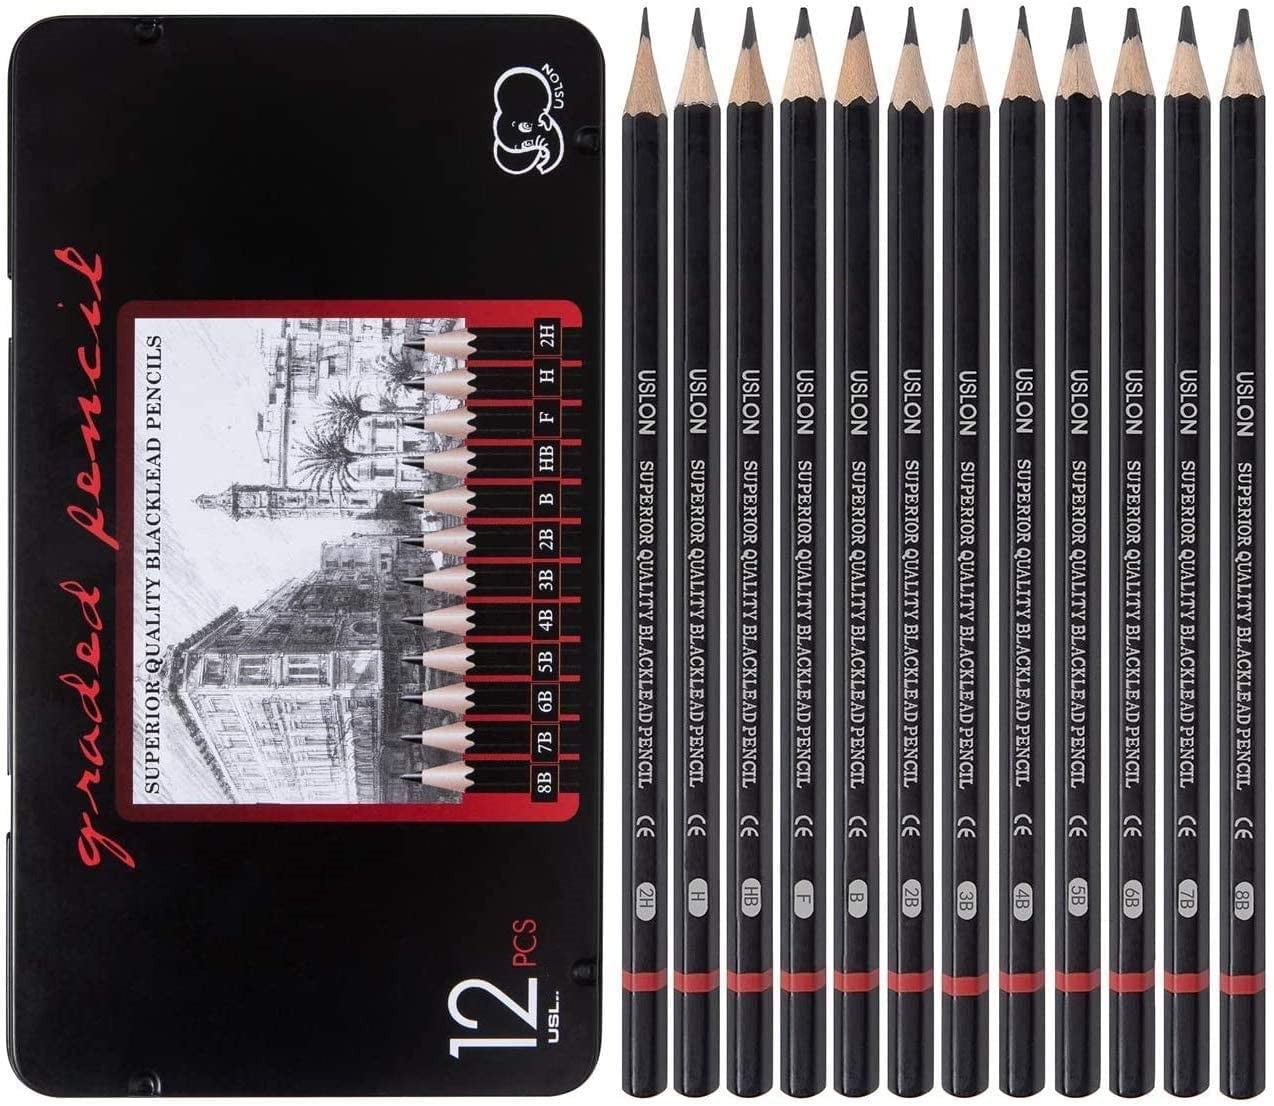 Professional Drawing Sketching Pencil Set - 12 Pieces Art Drawing Graphite  Pencils(2H-8B), Ideal for Drawing Art, Sketching, Shading, for Beginners &  Pro Artists 